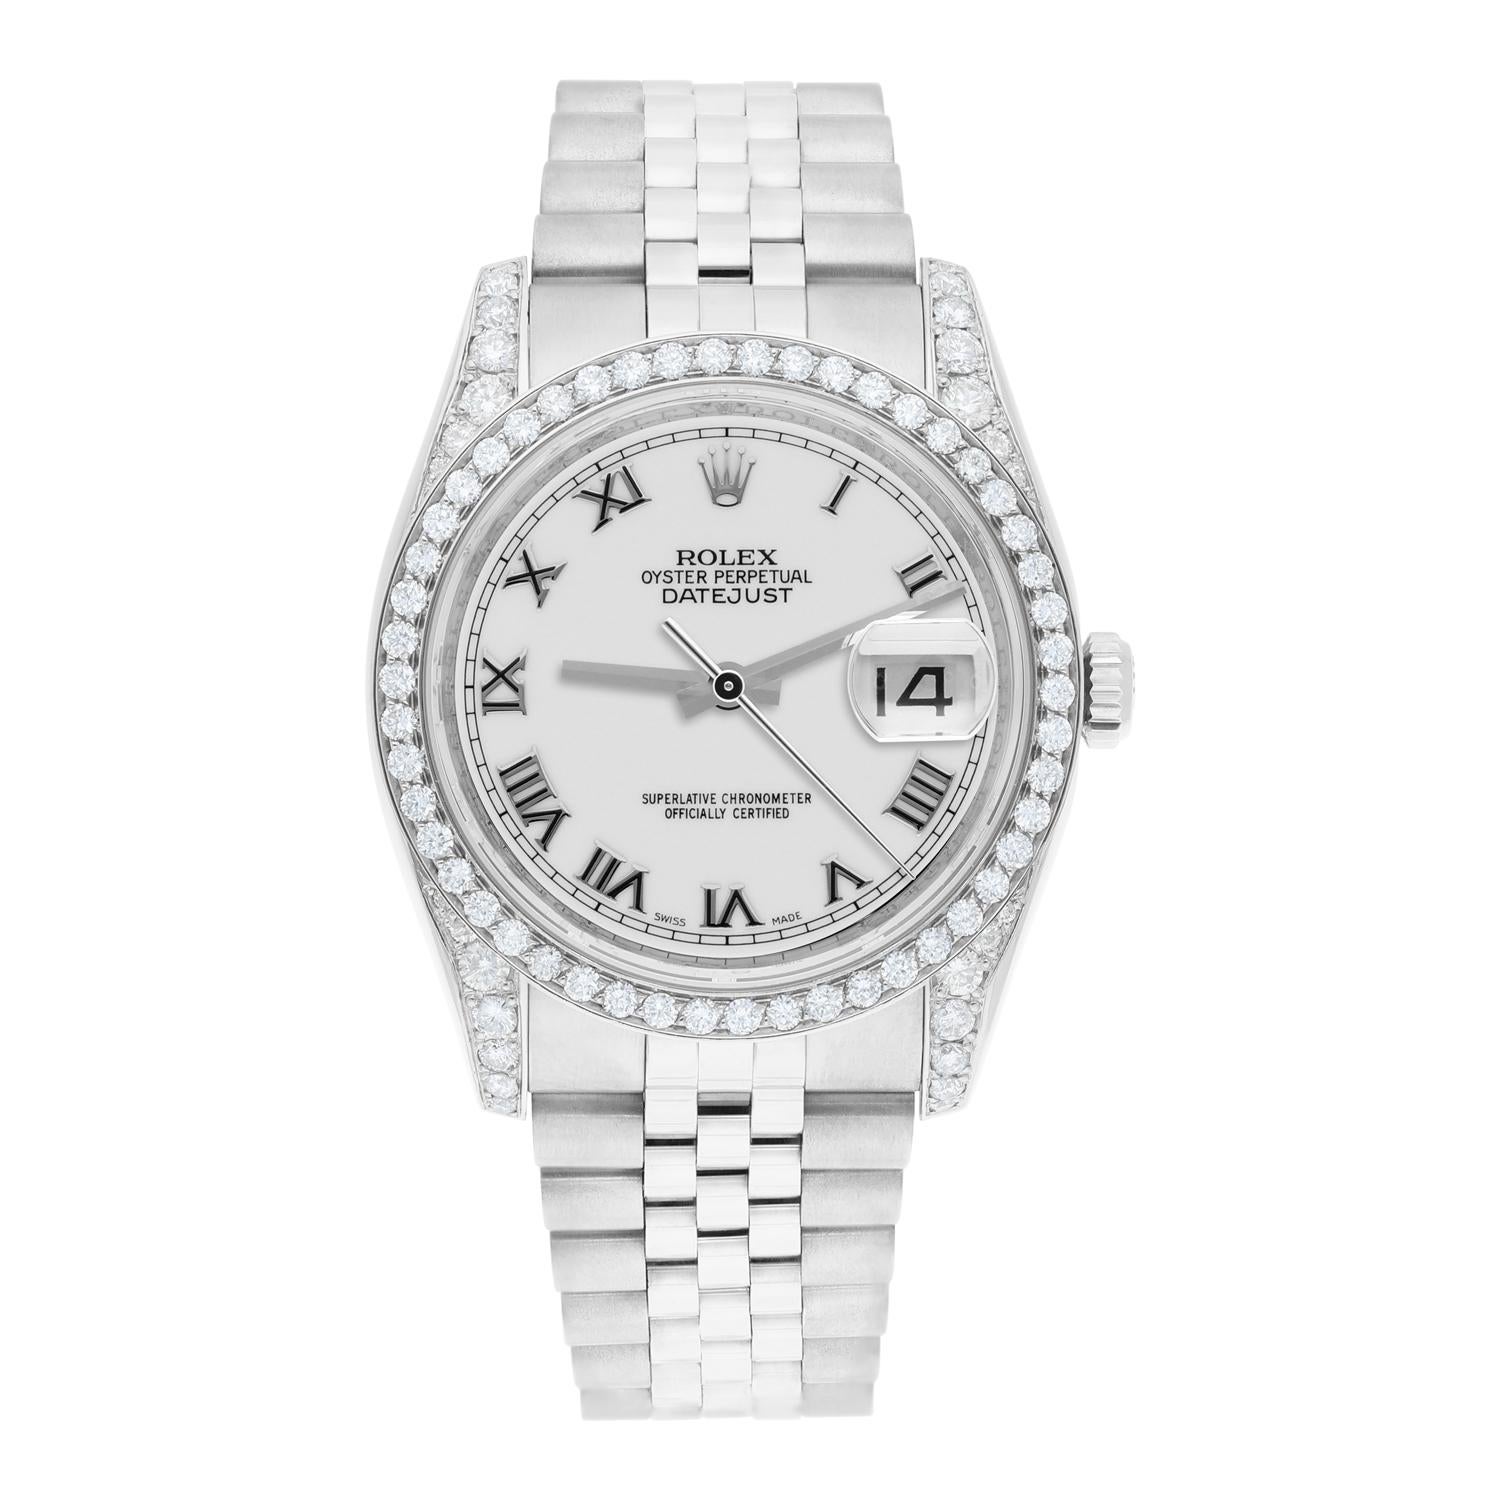 Brand: Rolex
Series: Datejust 
Model: 116234
Case Diameter: 36 mm
Bracelet: Jubilee band; stainless steel
Bezel. and Lugs: Custom Diamond Set
Dial: White Roman
Carat Weight: 2.30 carats in total diamond weight
The sale includes a Rolex box and an